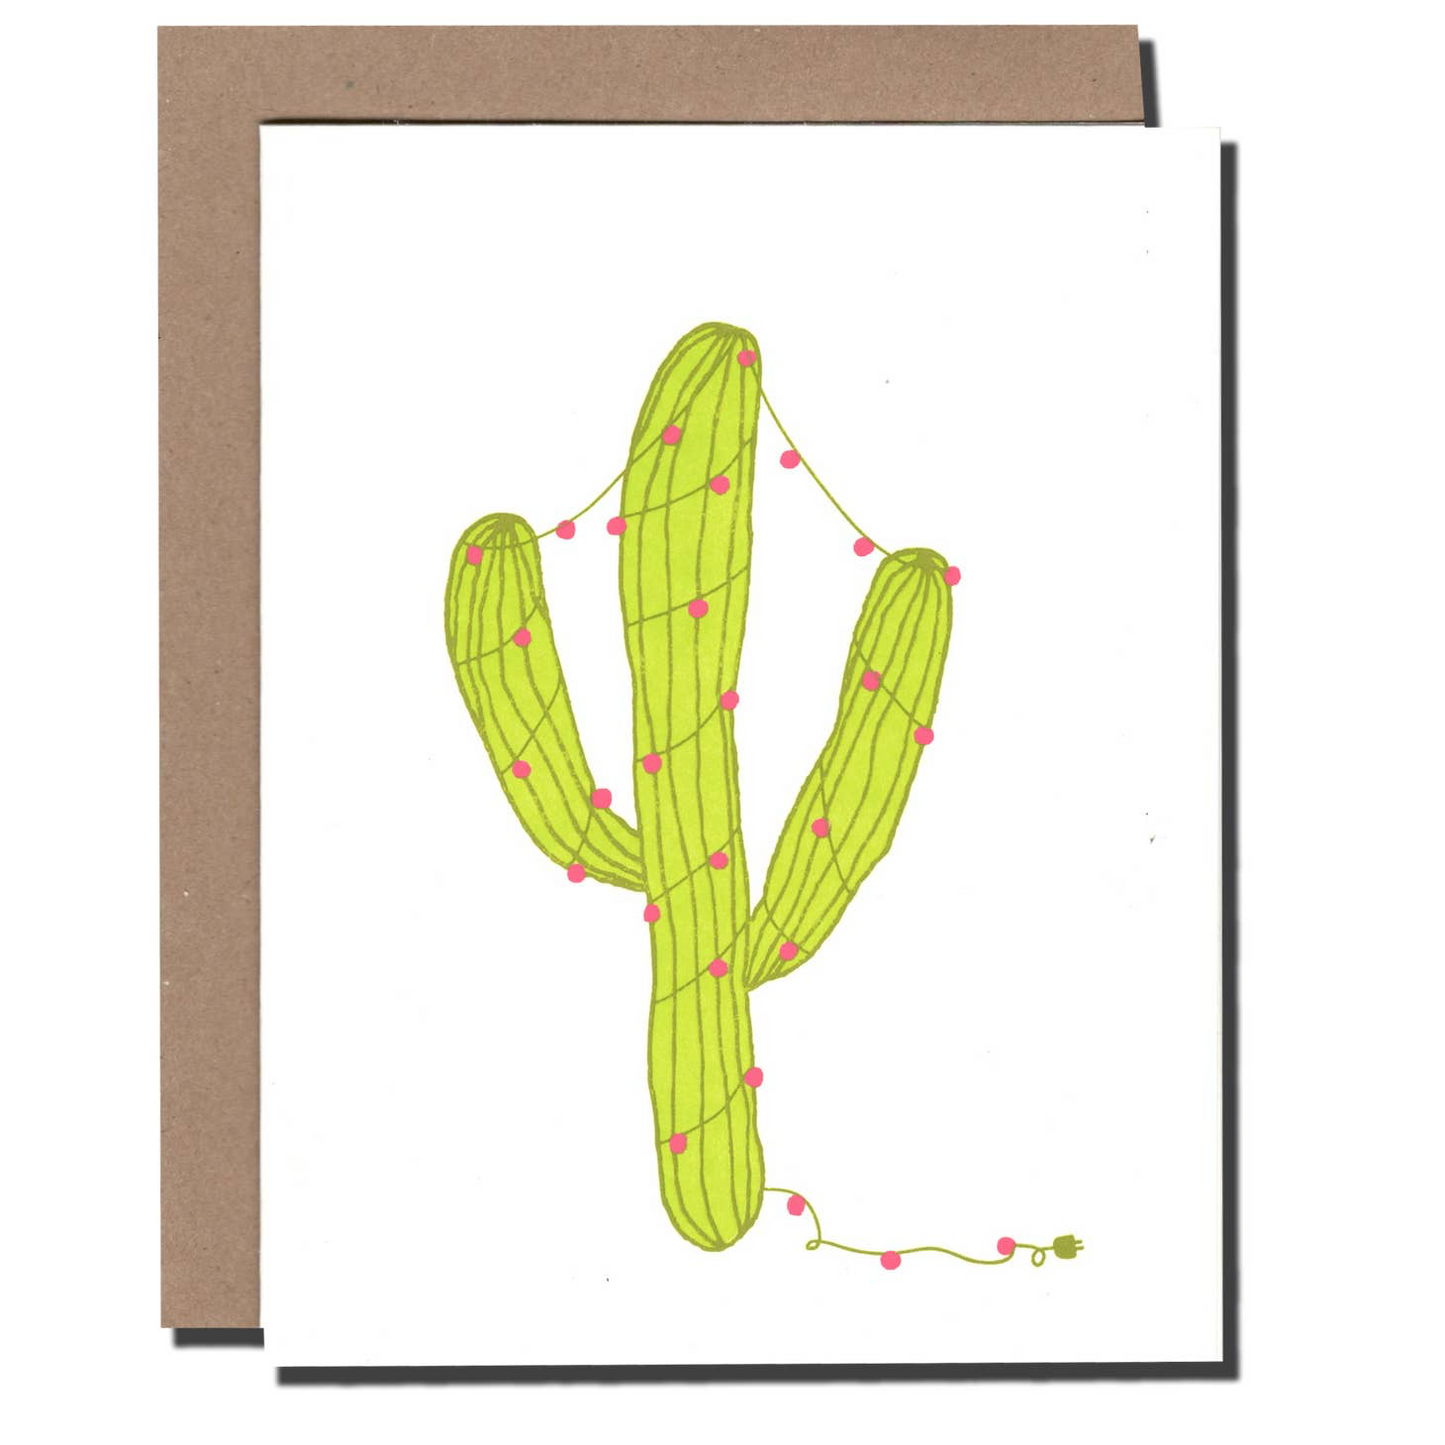 Power and Light Press - Greeting Cards